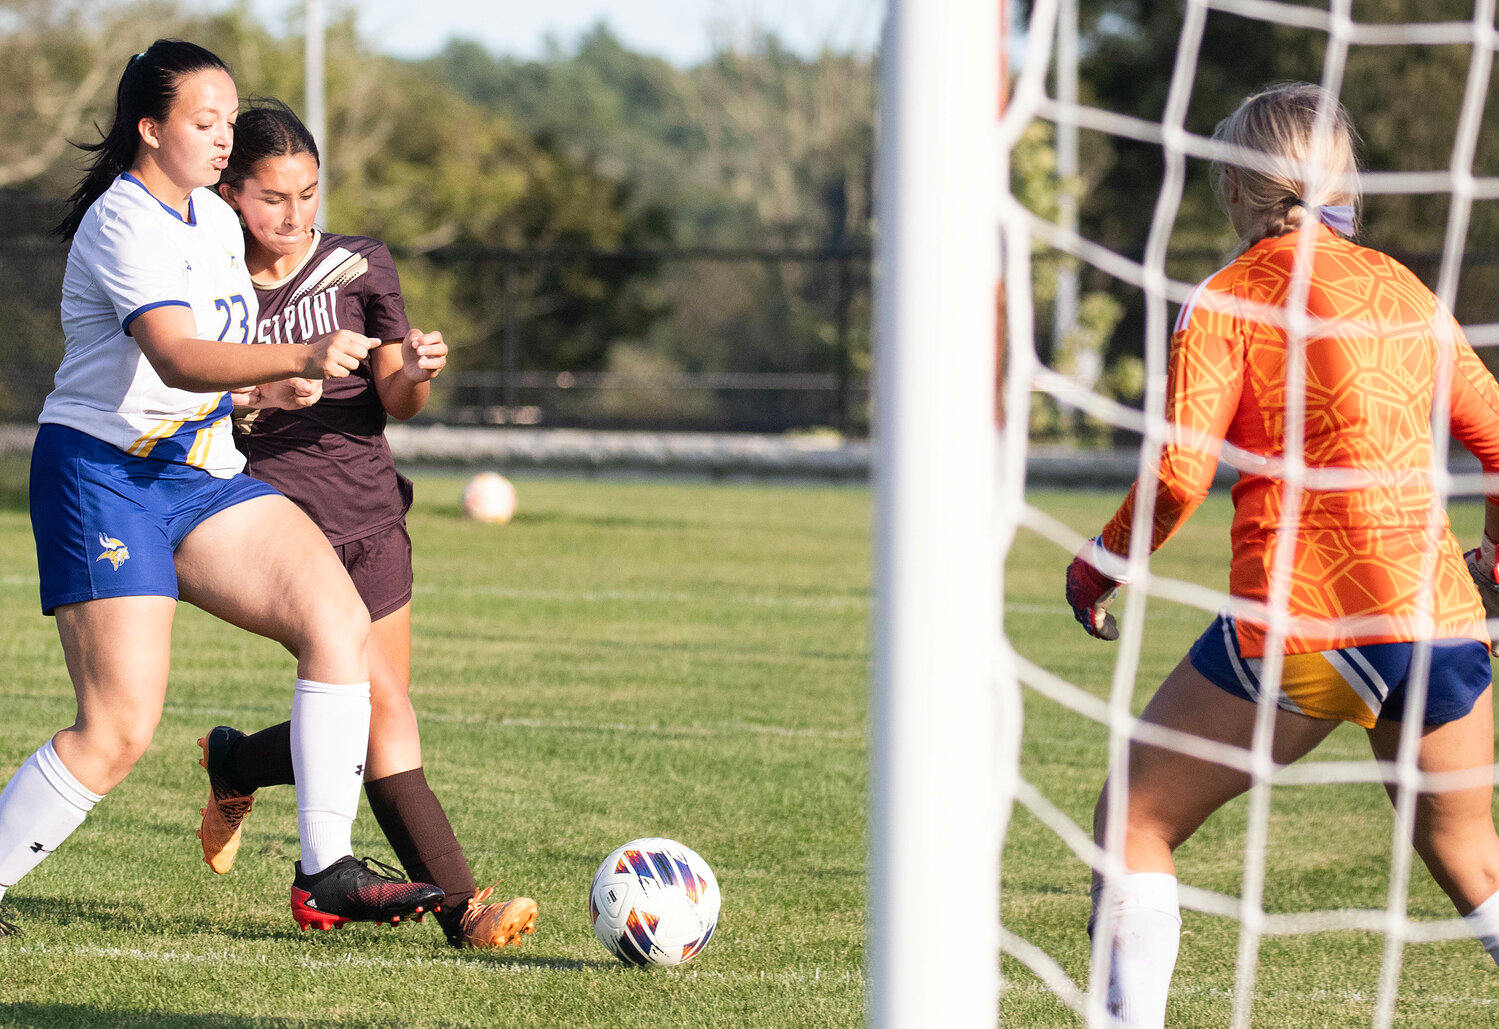 Freshman forward Morgan Pacheco attempts to take a kick on goal, while covered by a defender.